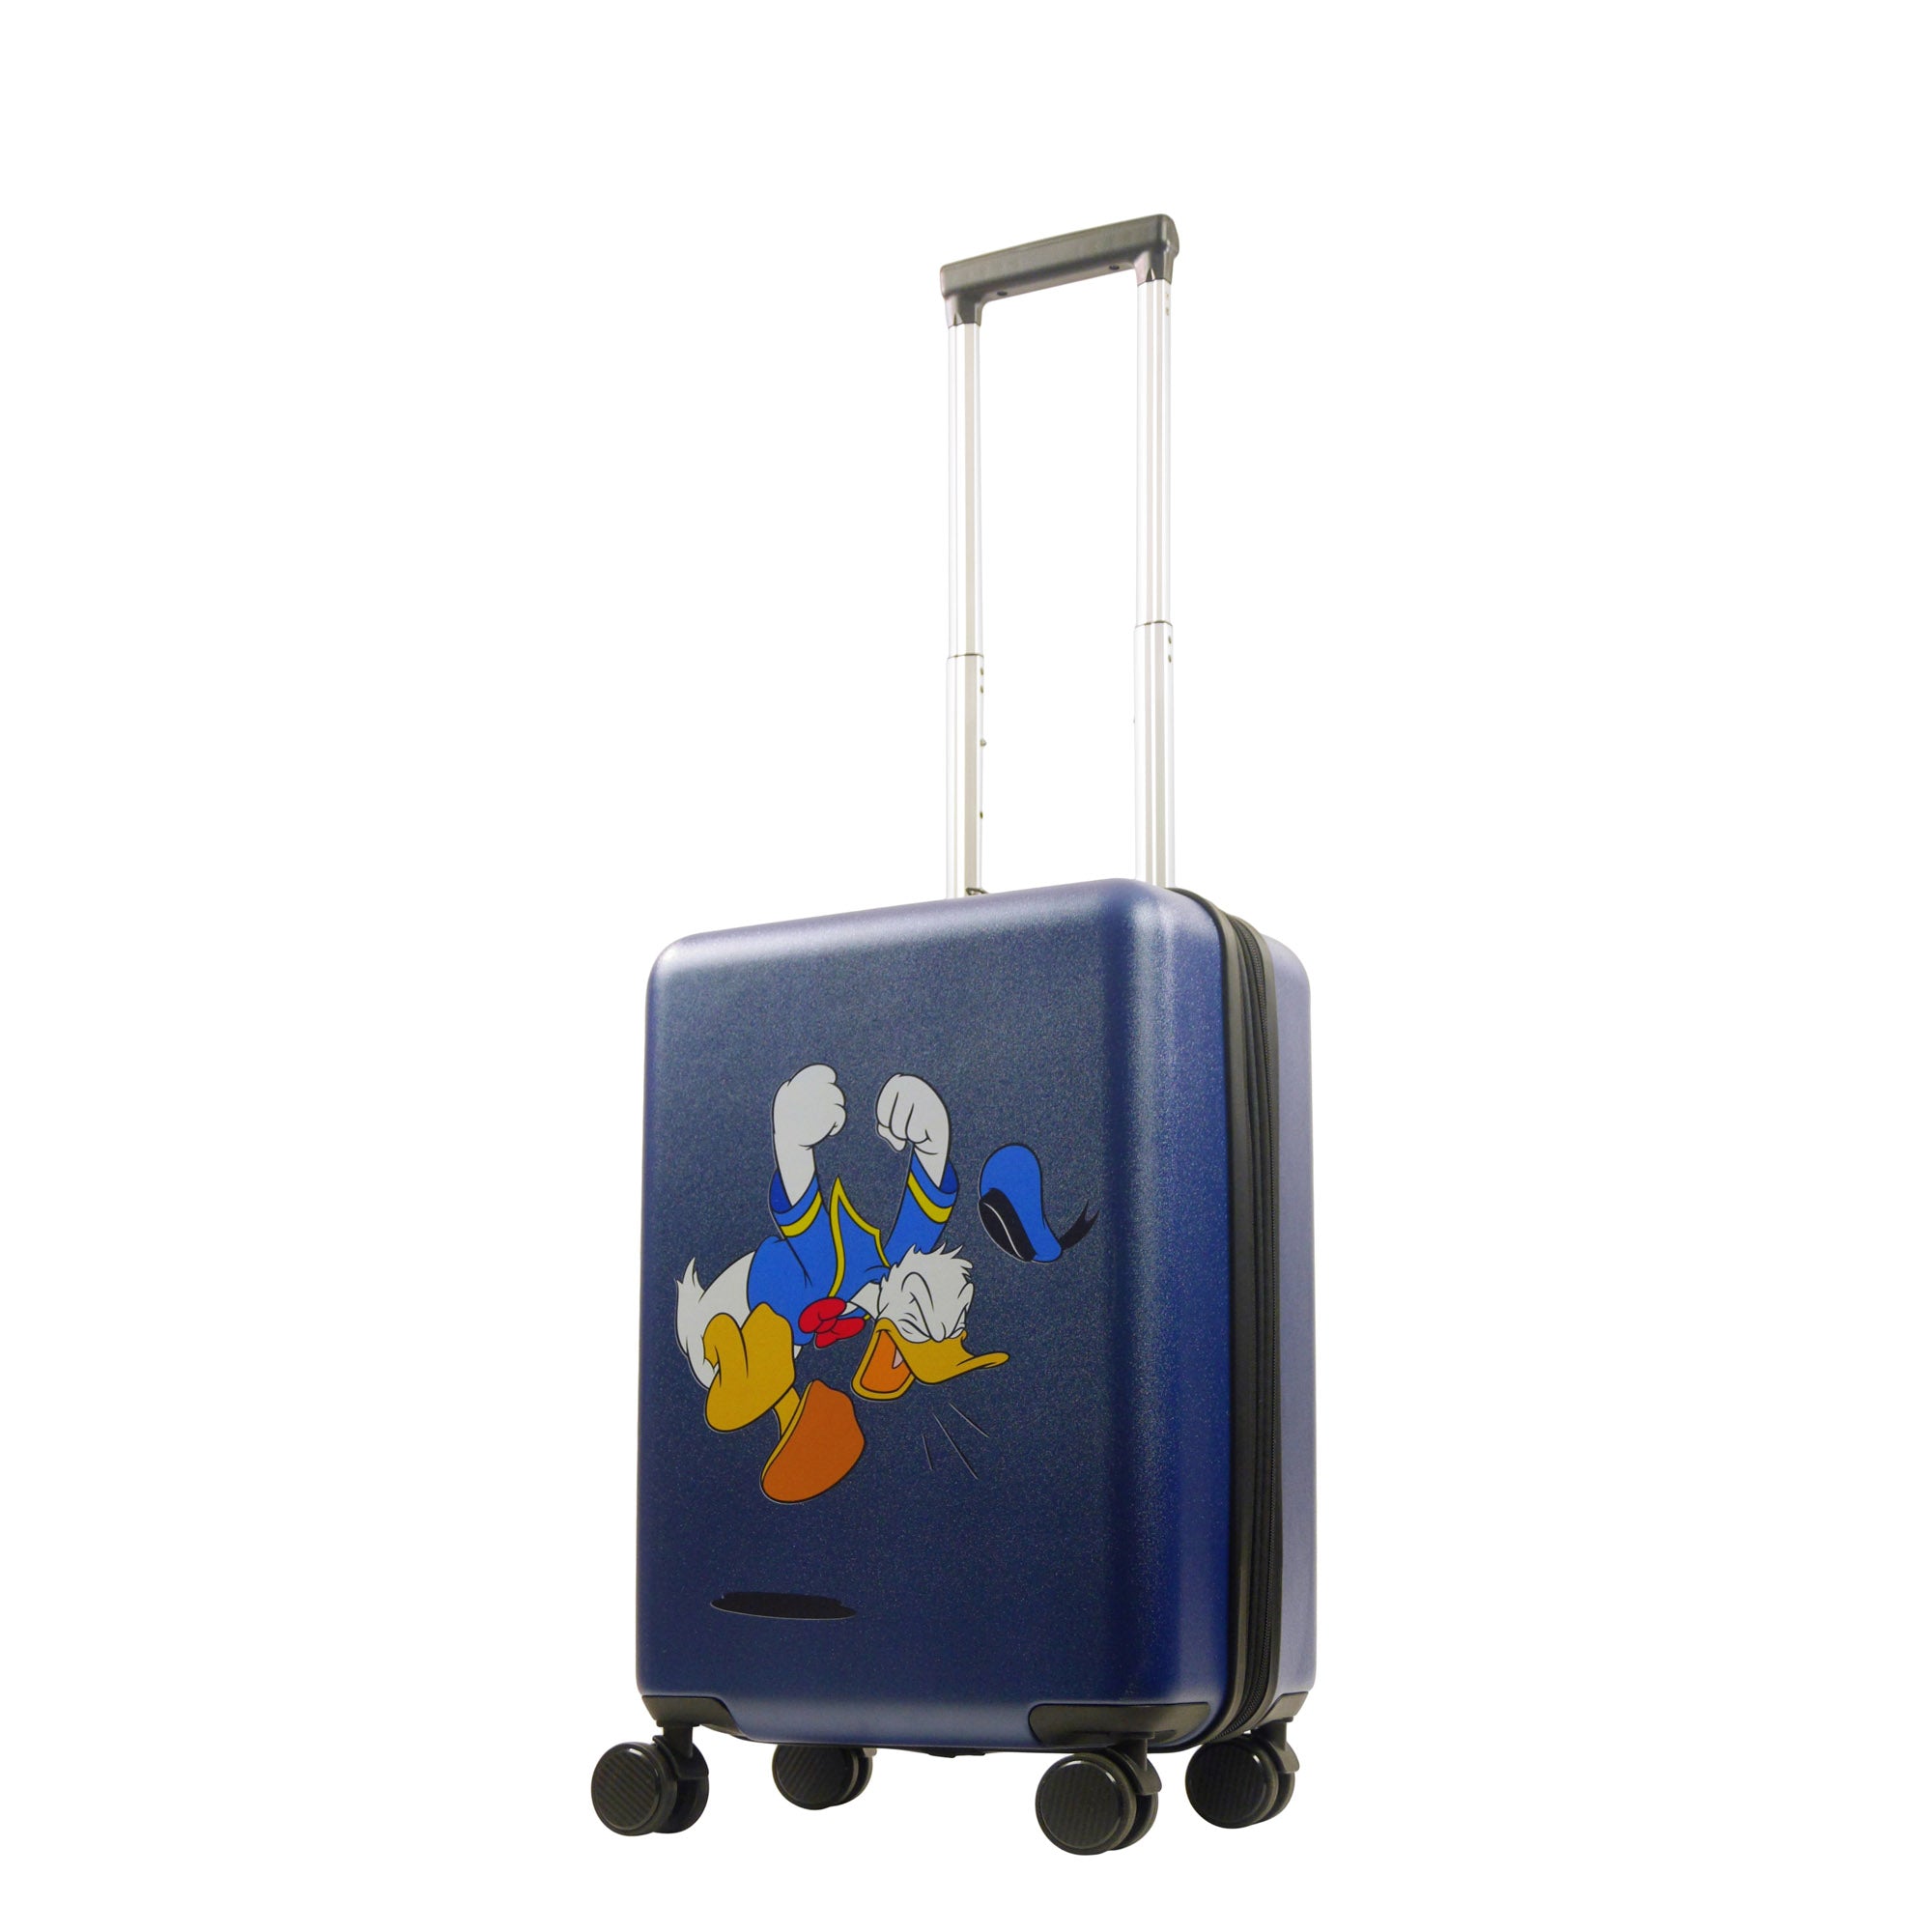 Disney Donald Duck 22.5" Navy Carry-On Rolling Luggage Spinner Suitcase by Ful